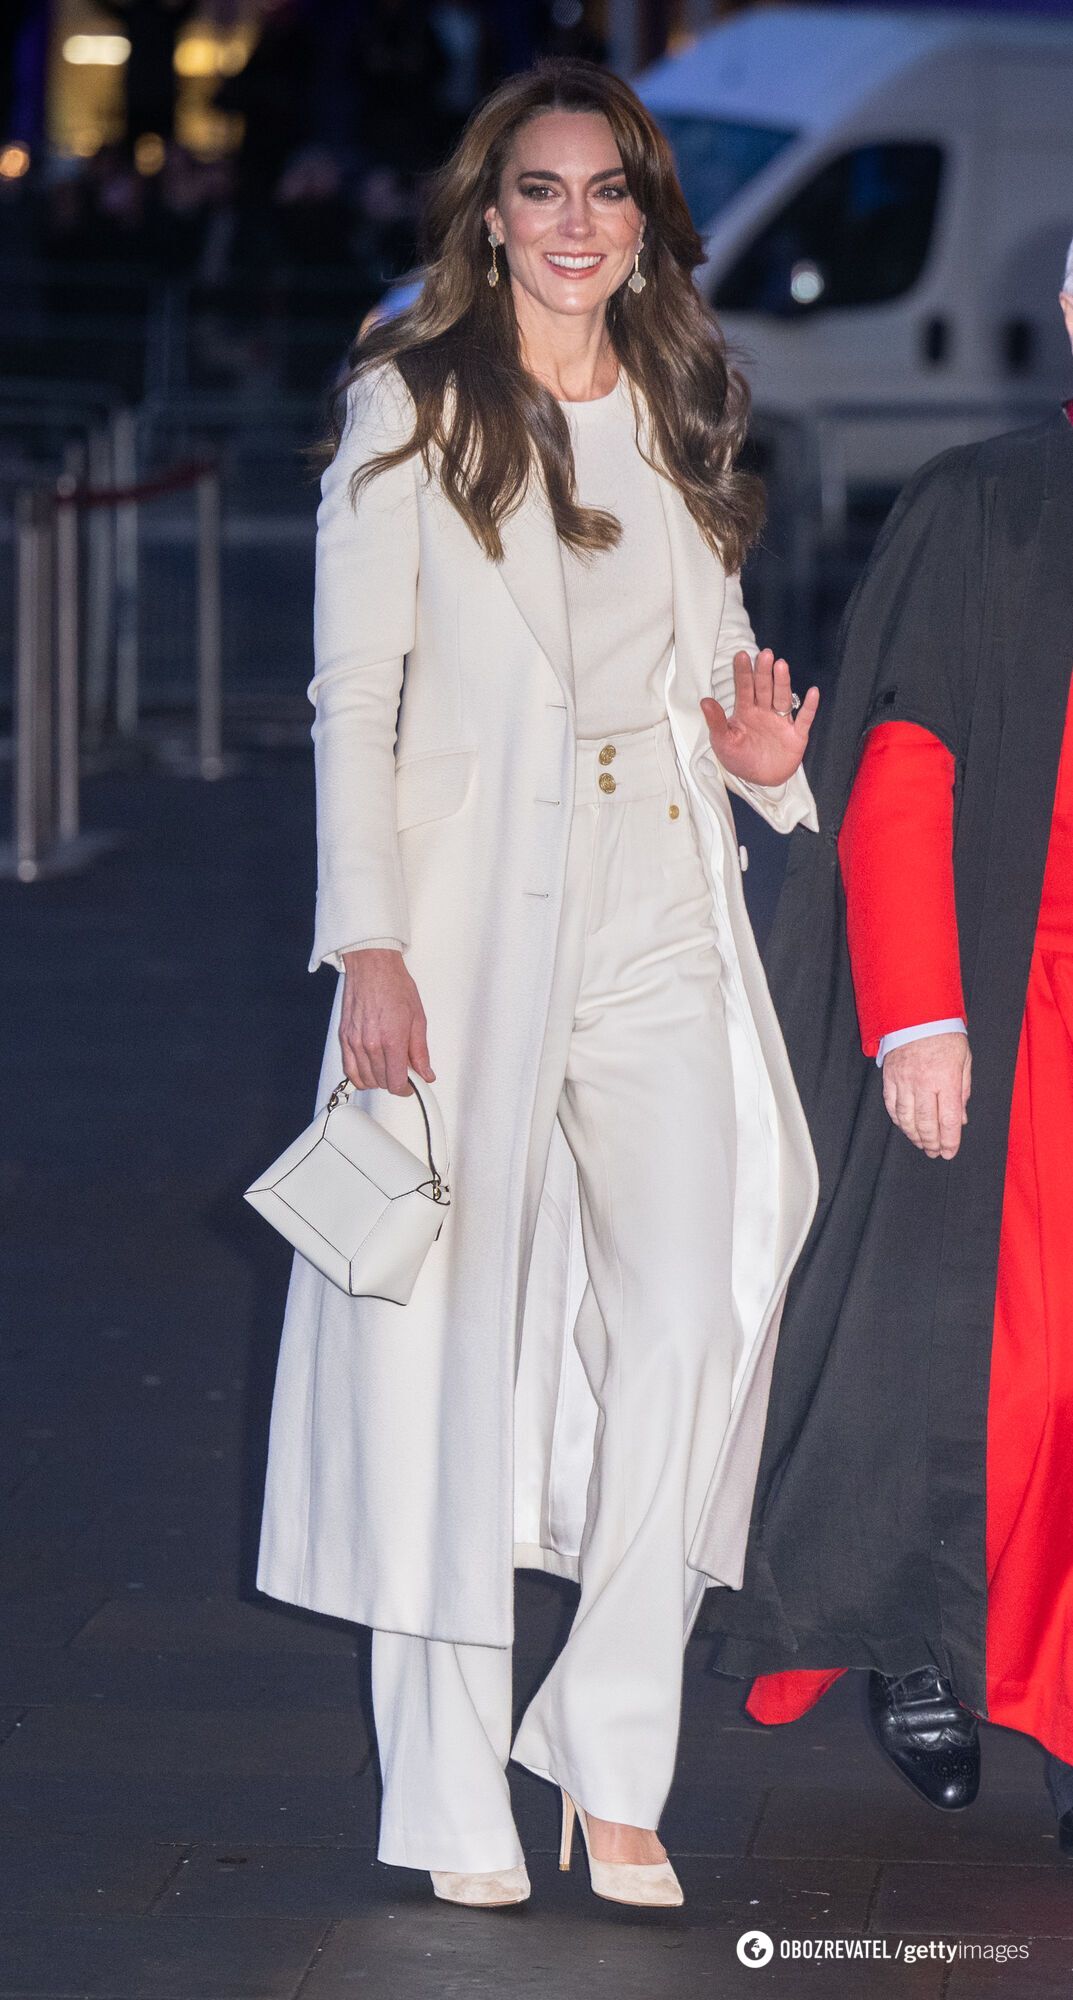 Kate Middleton's best looks for 2023: a ''revenge dress,'' colorful suits and wool pants